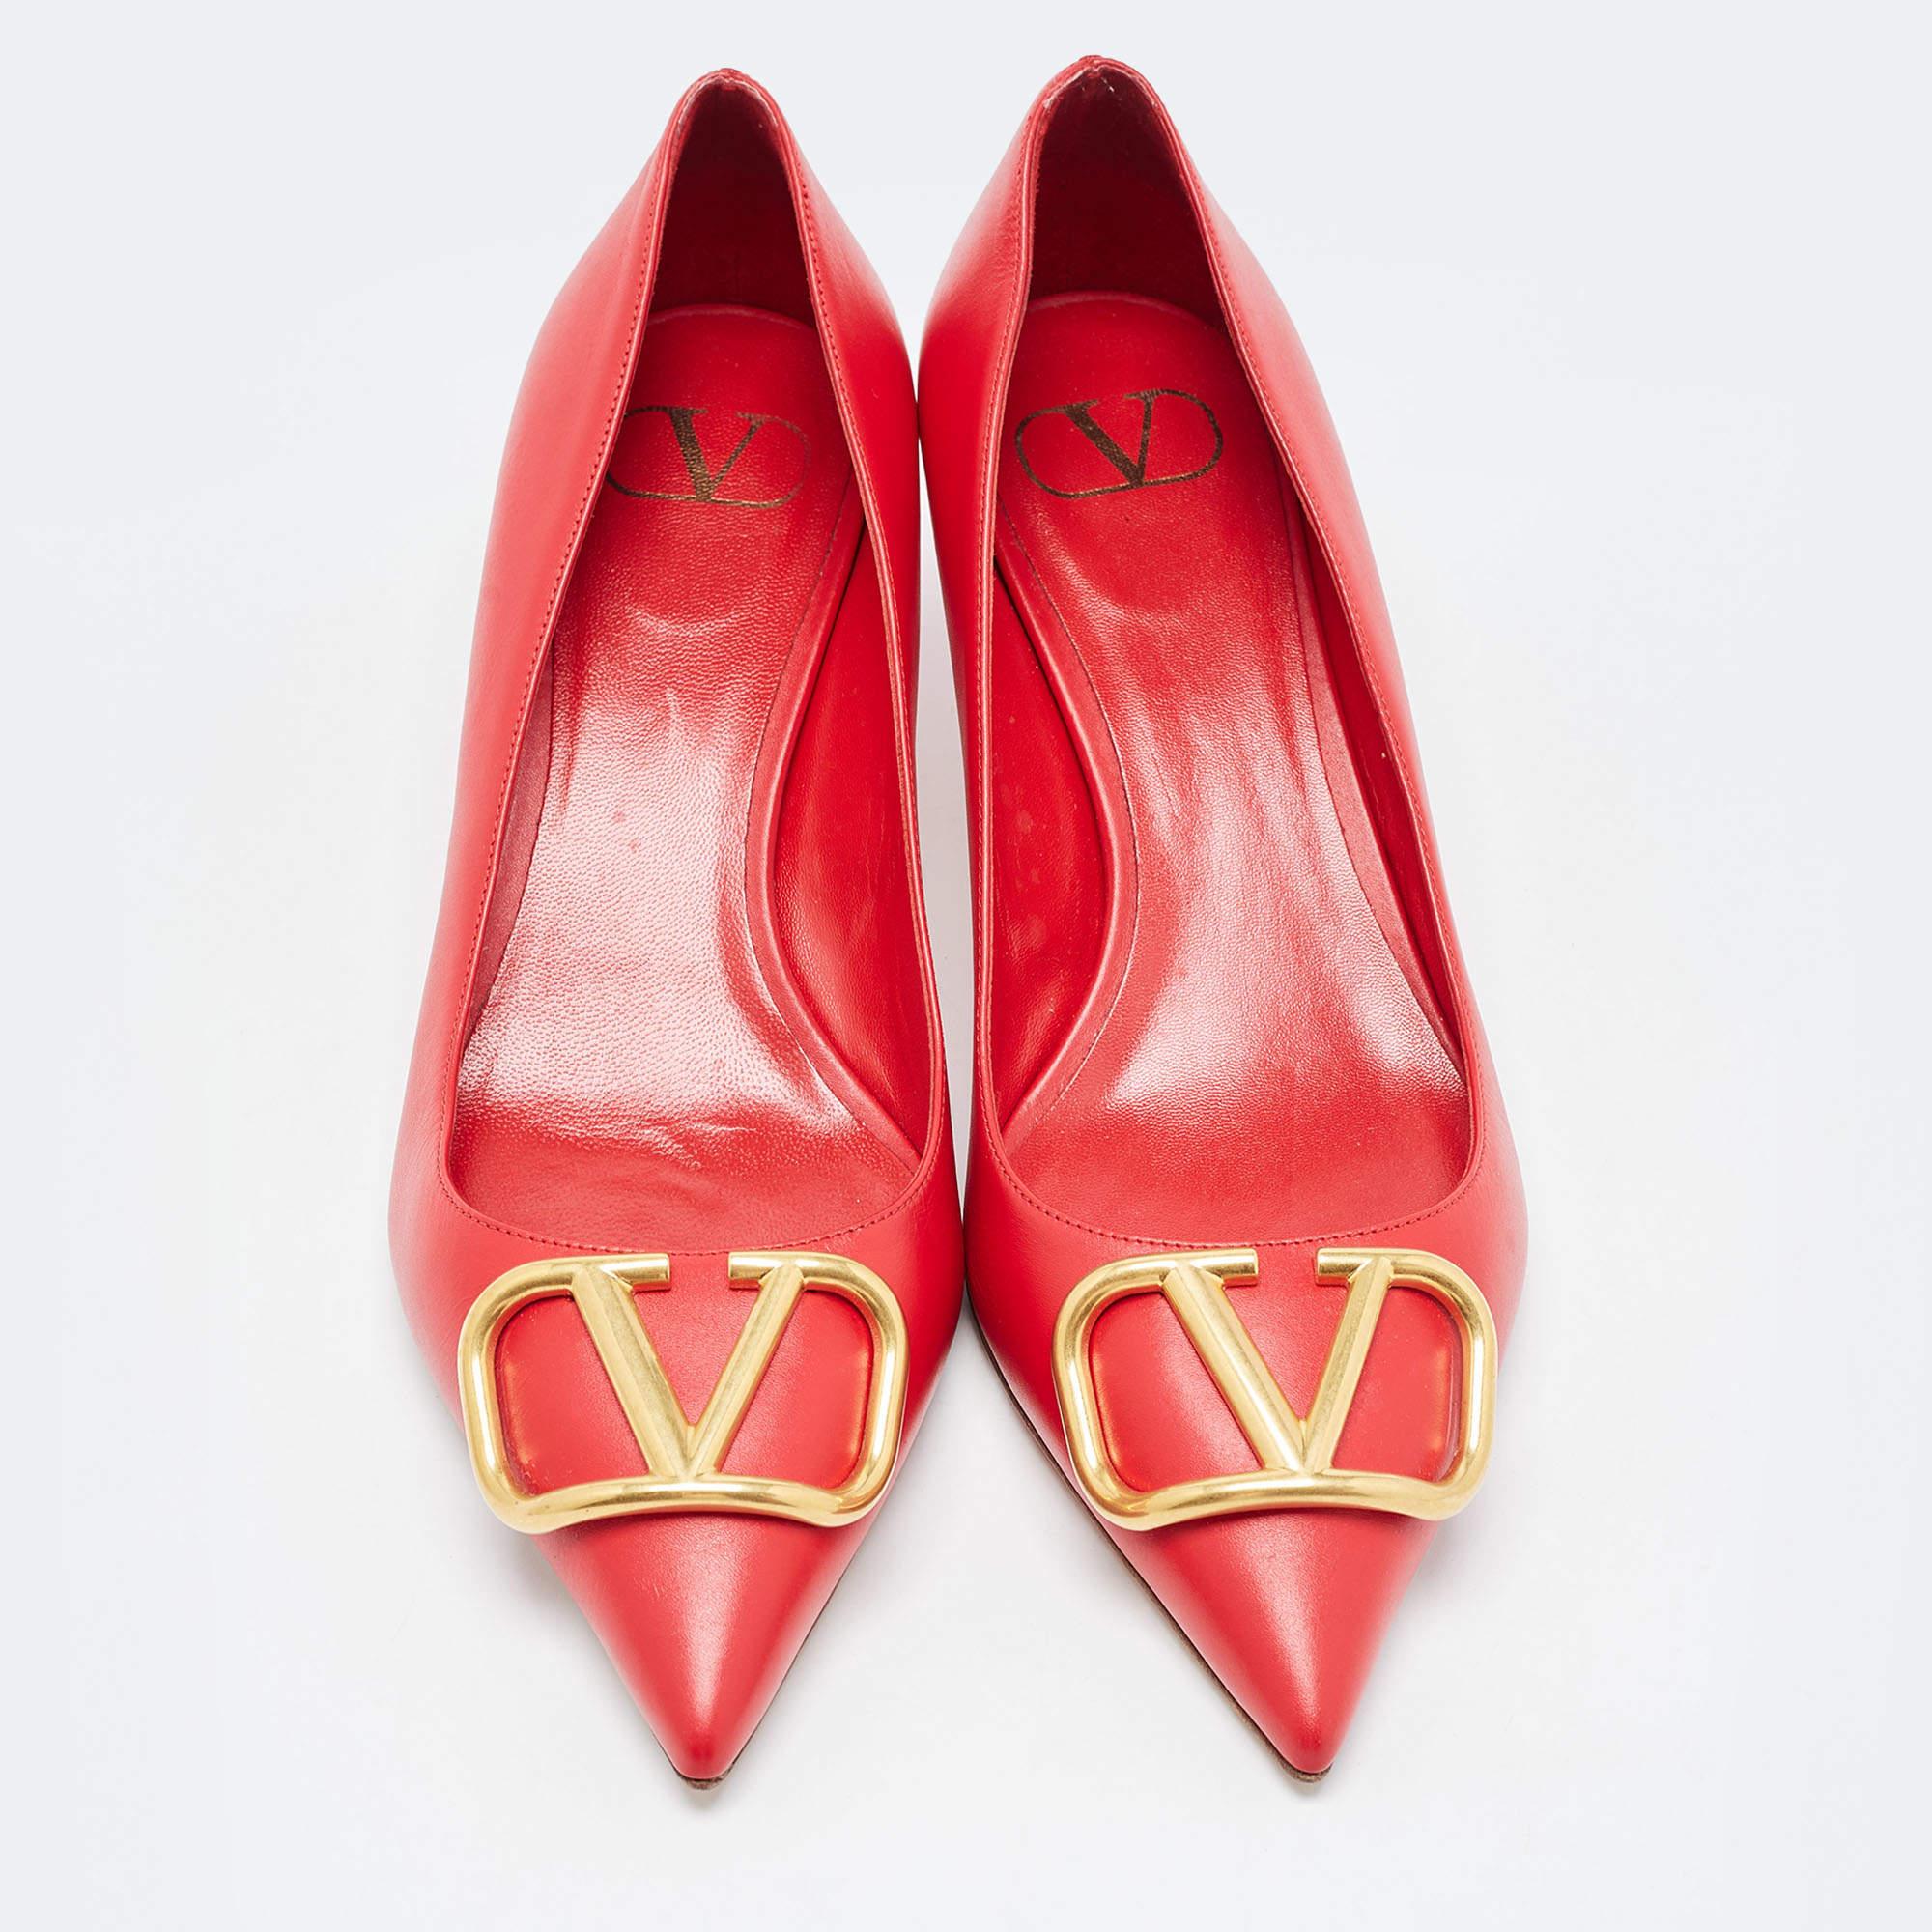 Perfectly sewn and finished to ensure an elegant look and fit, these Valentino red shoes are a purchase you'll love flaunting. They look great on the feet.

Includes: Original Dustbag, Original Box, Extra heel tips, Info Booklet

